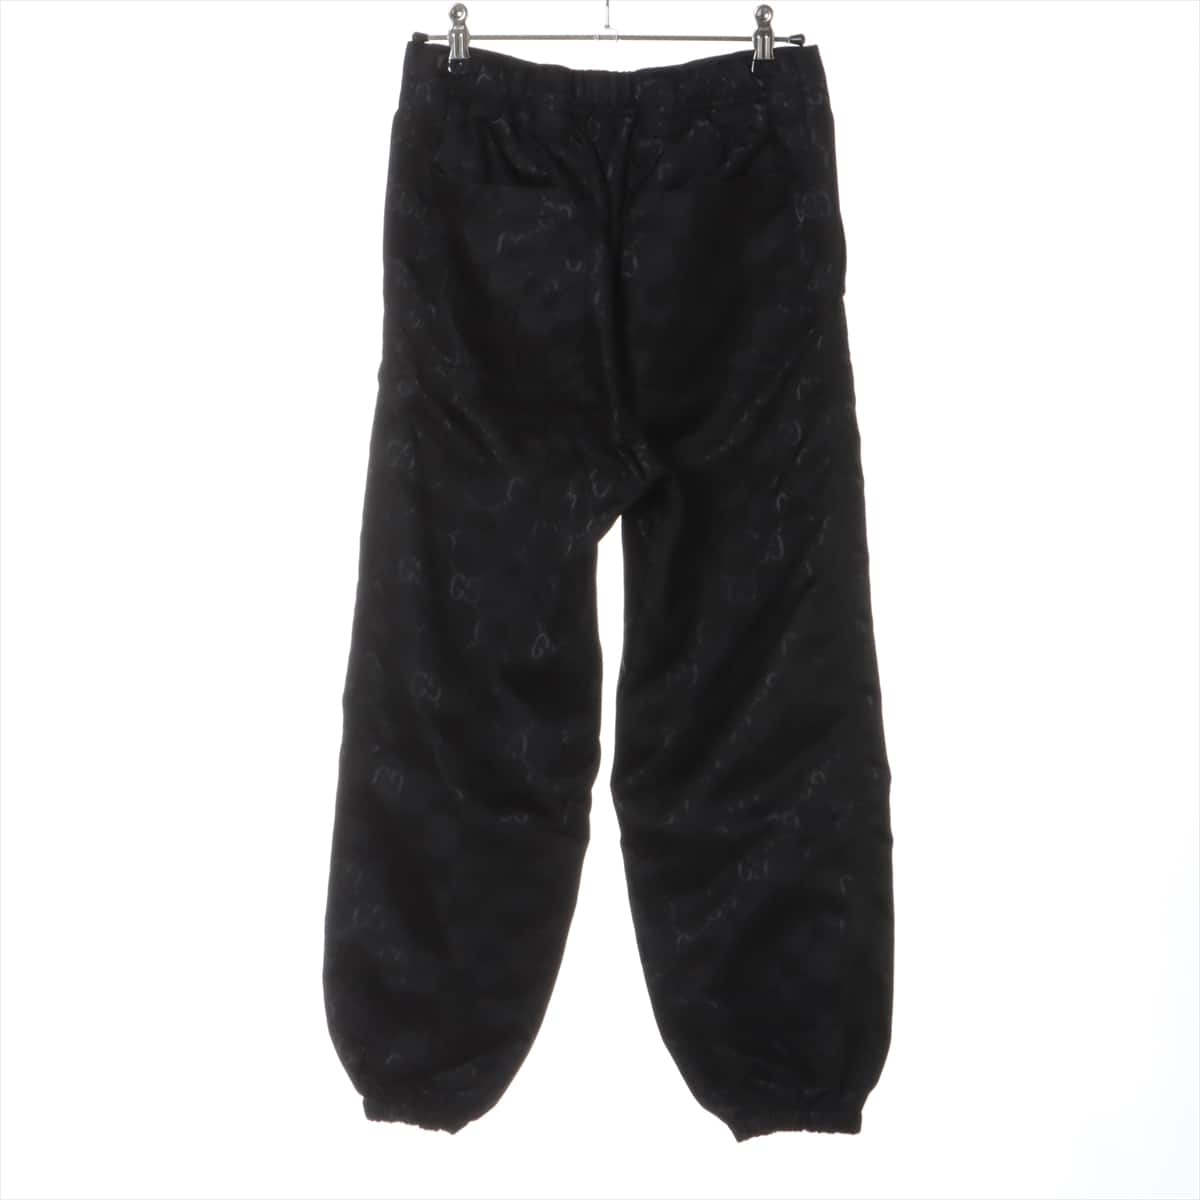 Gucci GG jacquard Nylon Pants 38 Men's Black  631111 Gaiters are out of stock